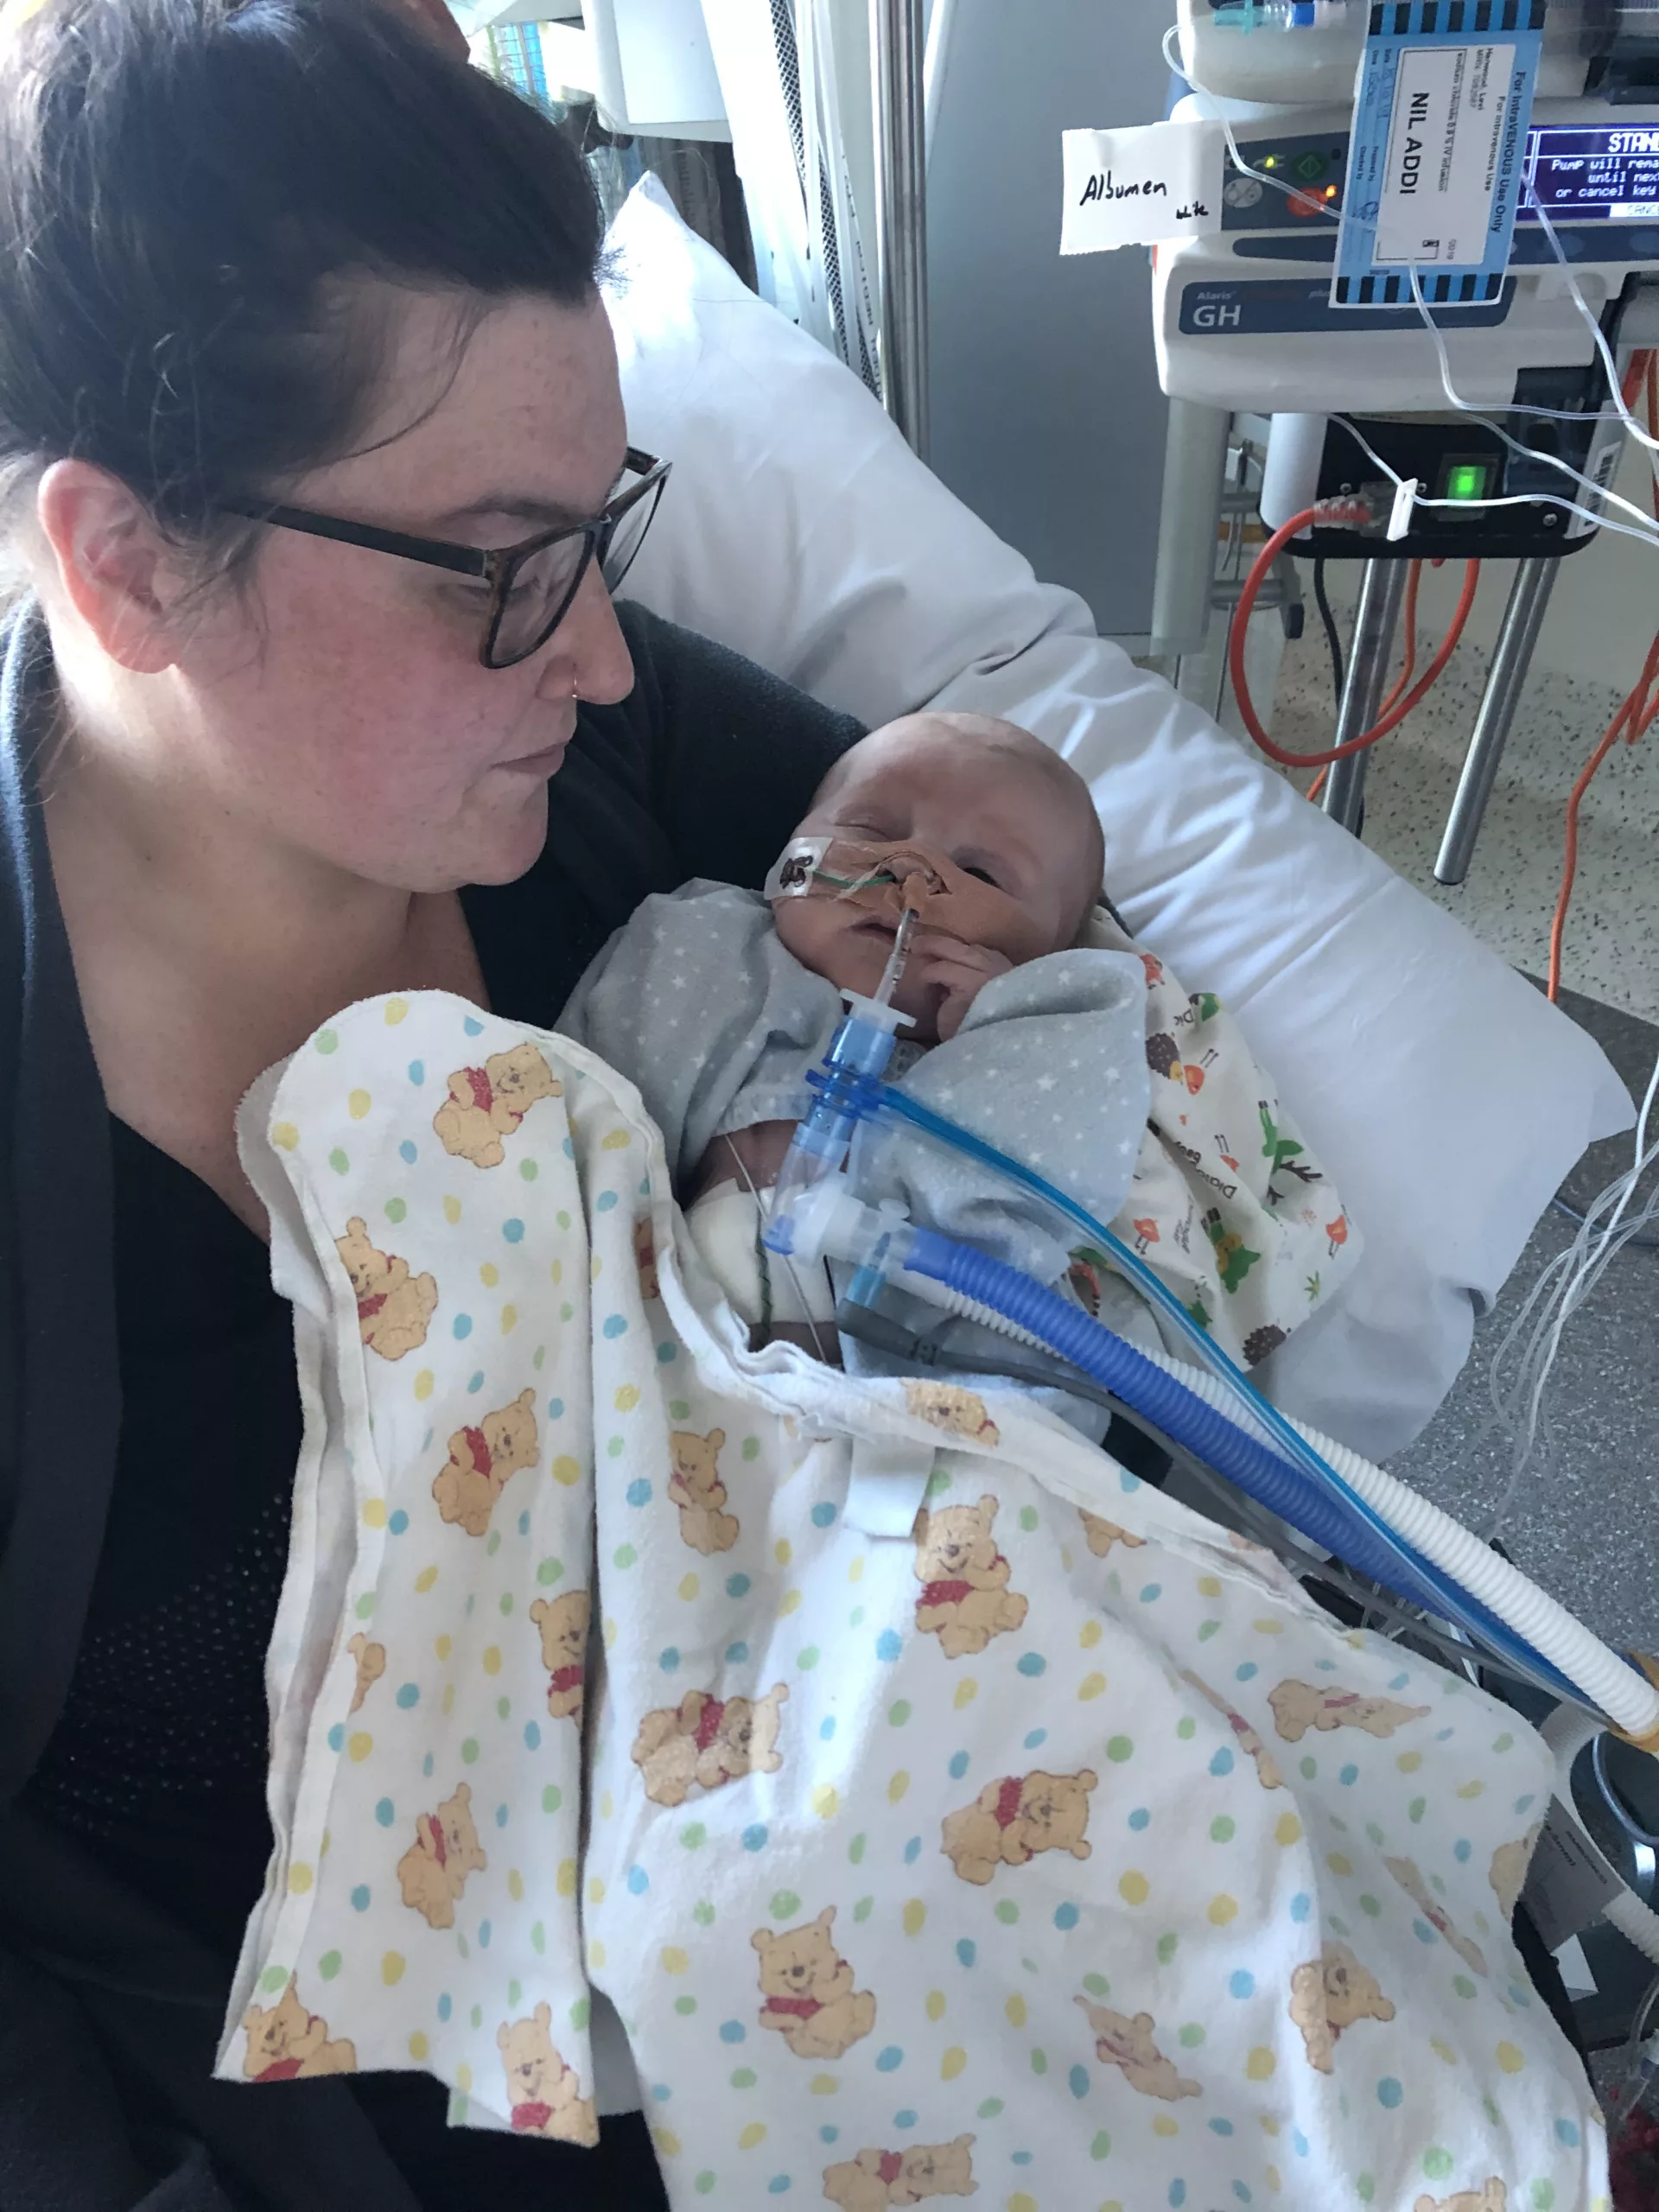 Little Levi being held by his Mum in the hospital